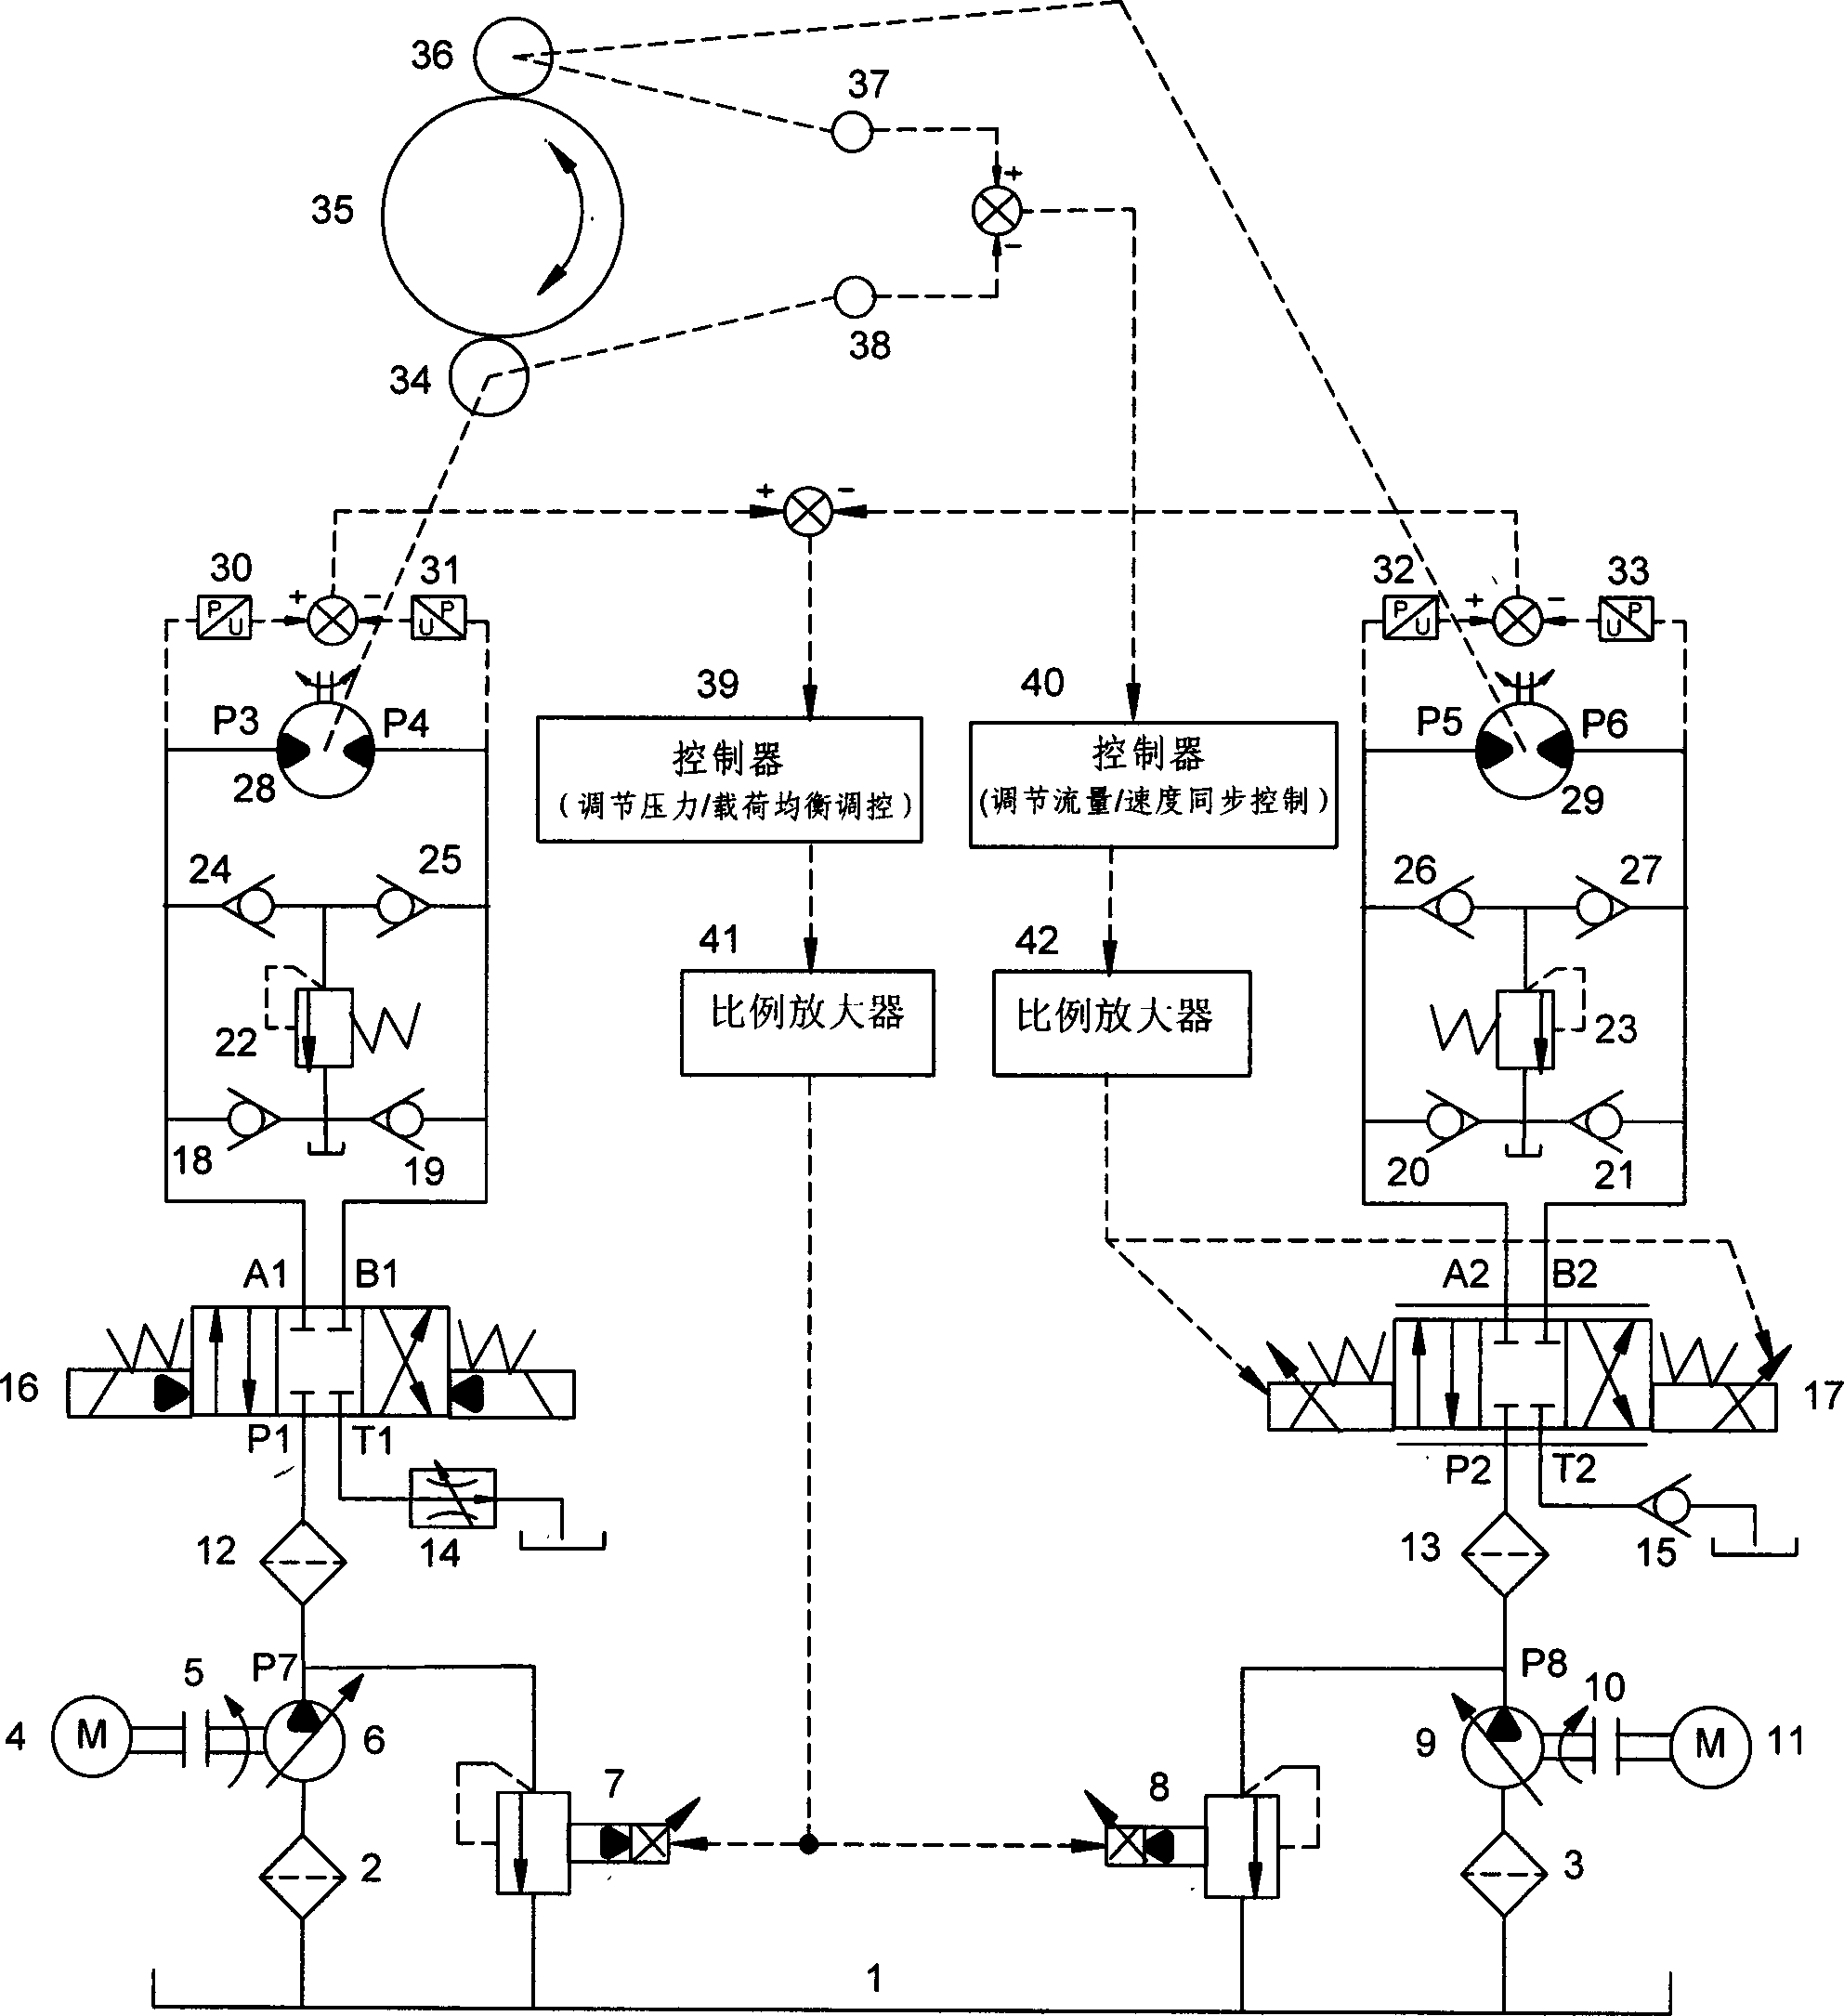 Hydraulic synchronous system for realizing load balance based on proportional relief valve